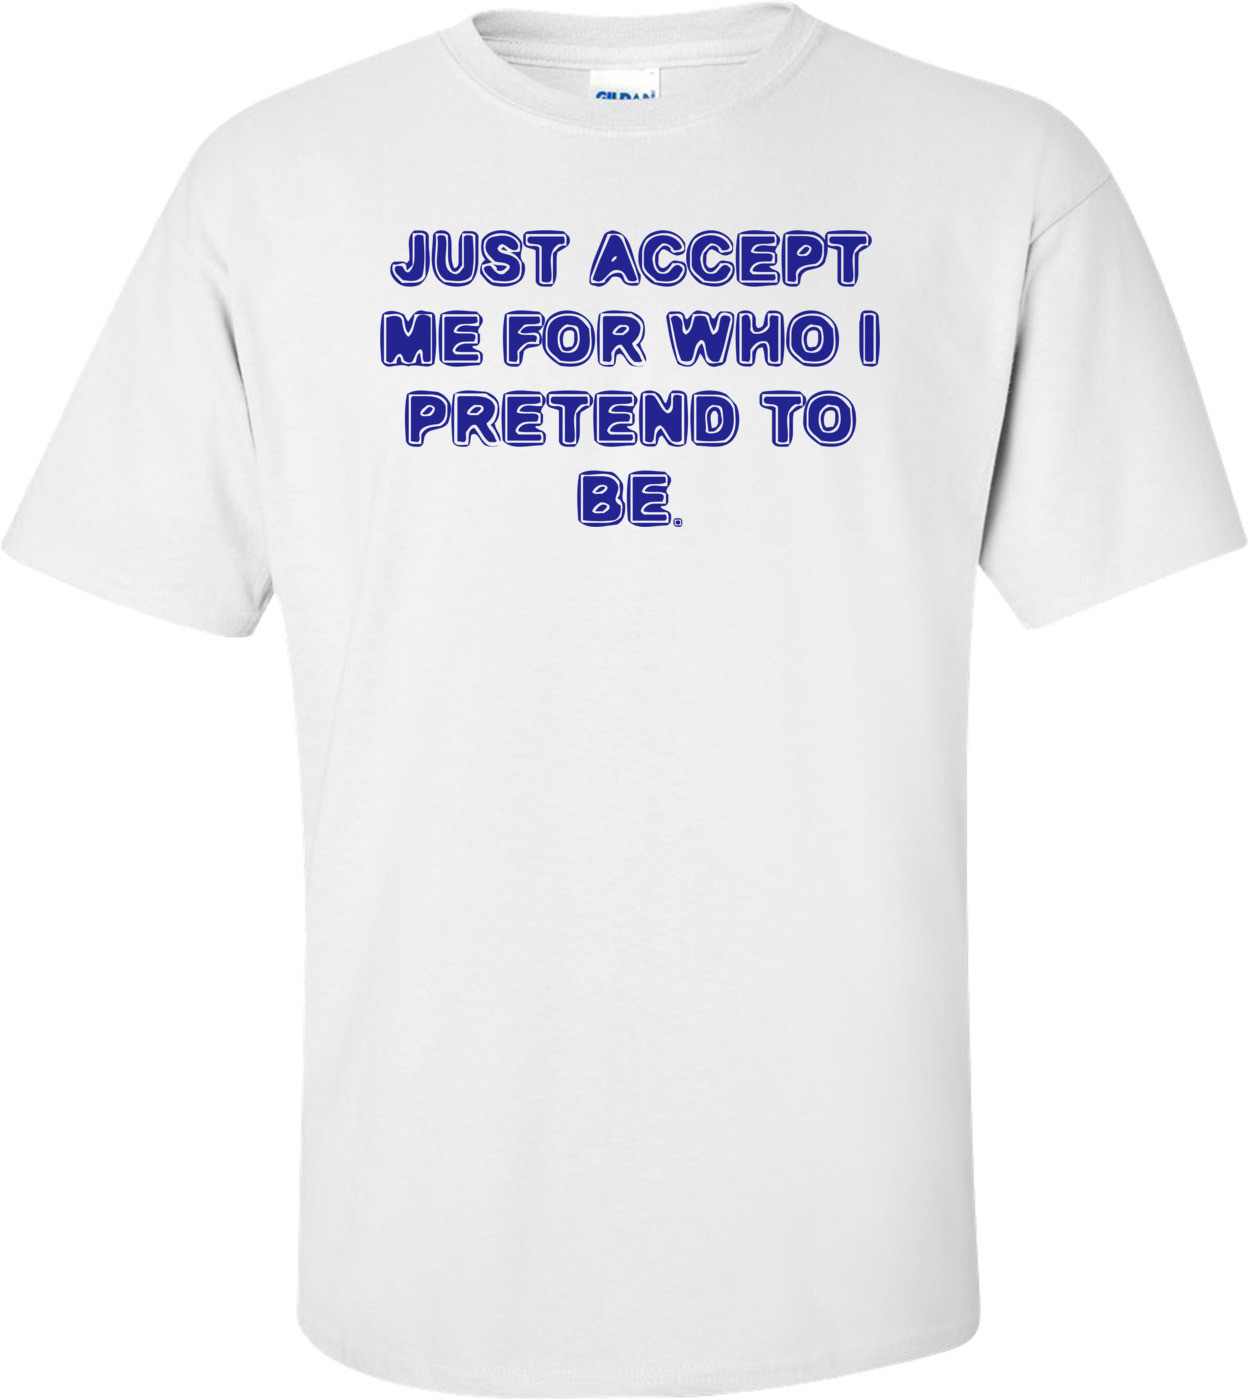 JUST ACCEPT ME FOR WHO I PRETEND TO BE. Shirt